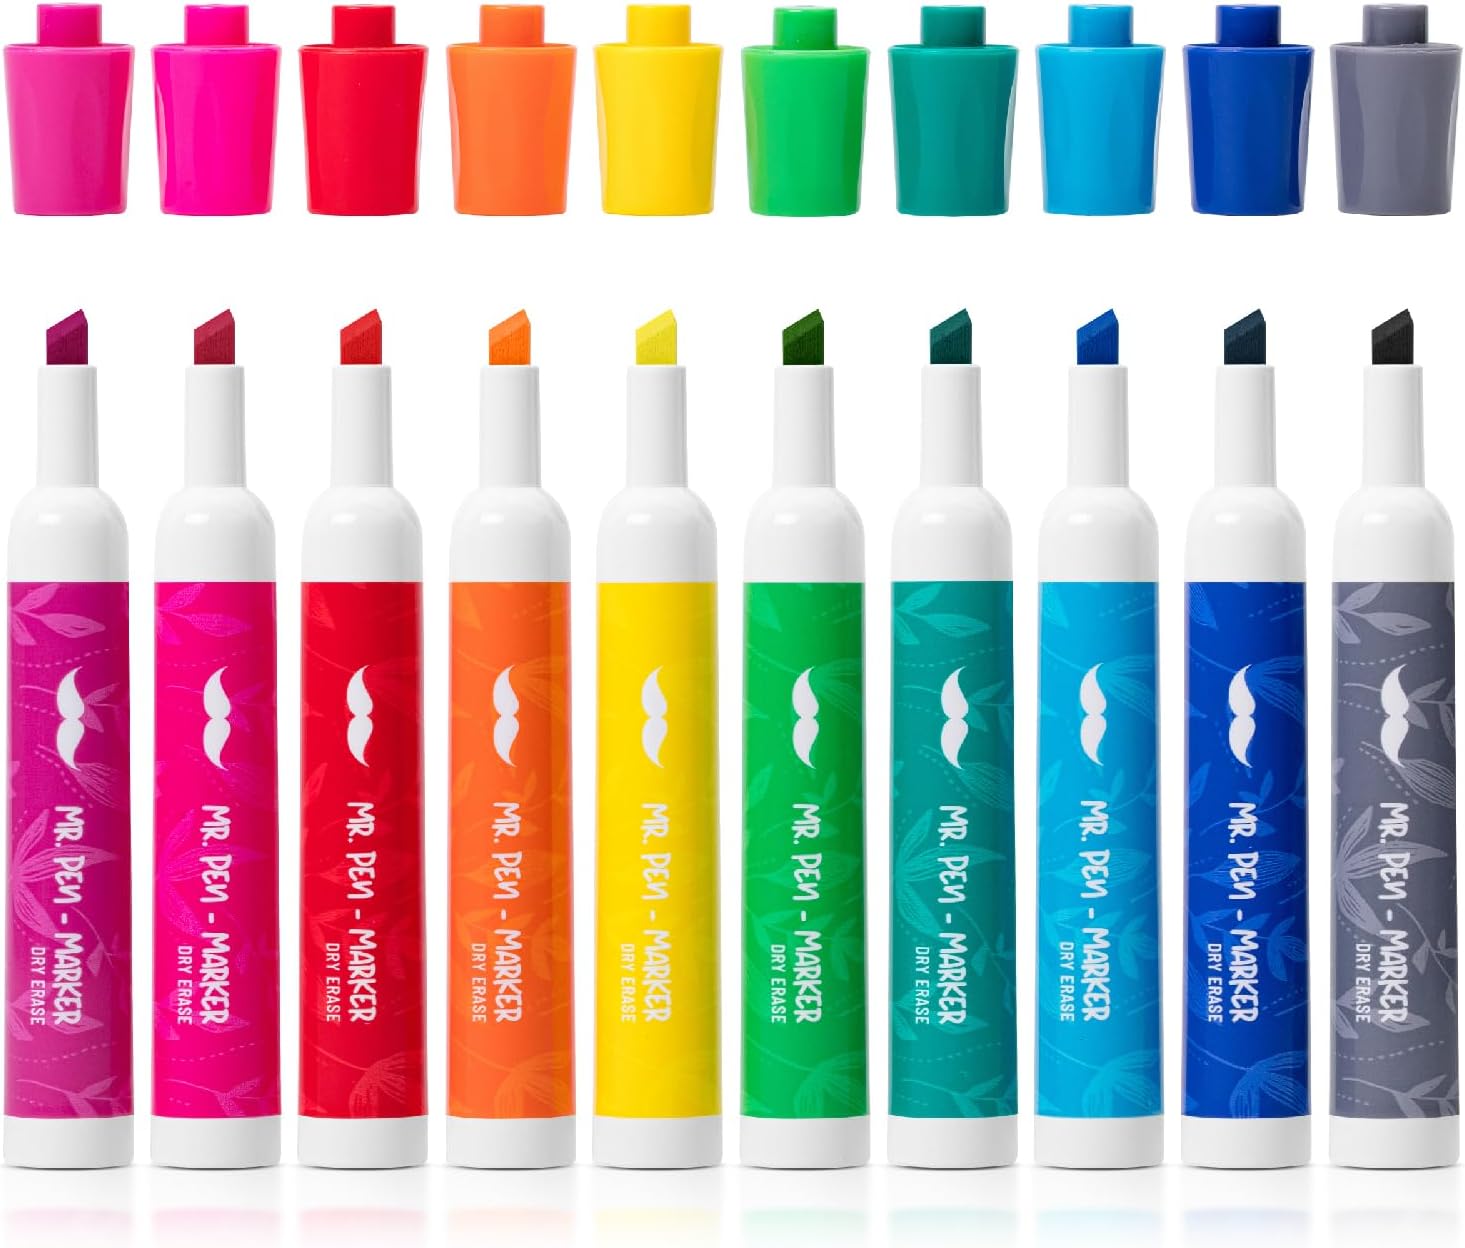 Mr. Pen- Dry Erase Markers, Low Odor Chisel Tip, 10 Pack, Vibrant Colors, White Board Markers Dry Erase, Chisel Tip Markers, Whiteboard Markers, Dry Erase Pens, Dry Erase Markers Chisel Tip